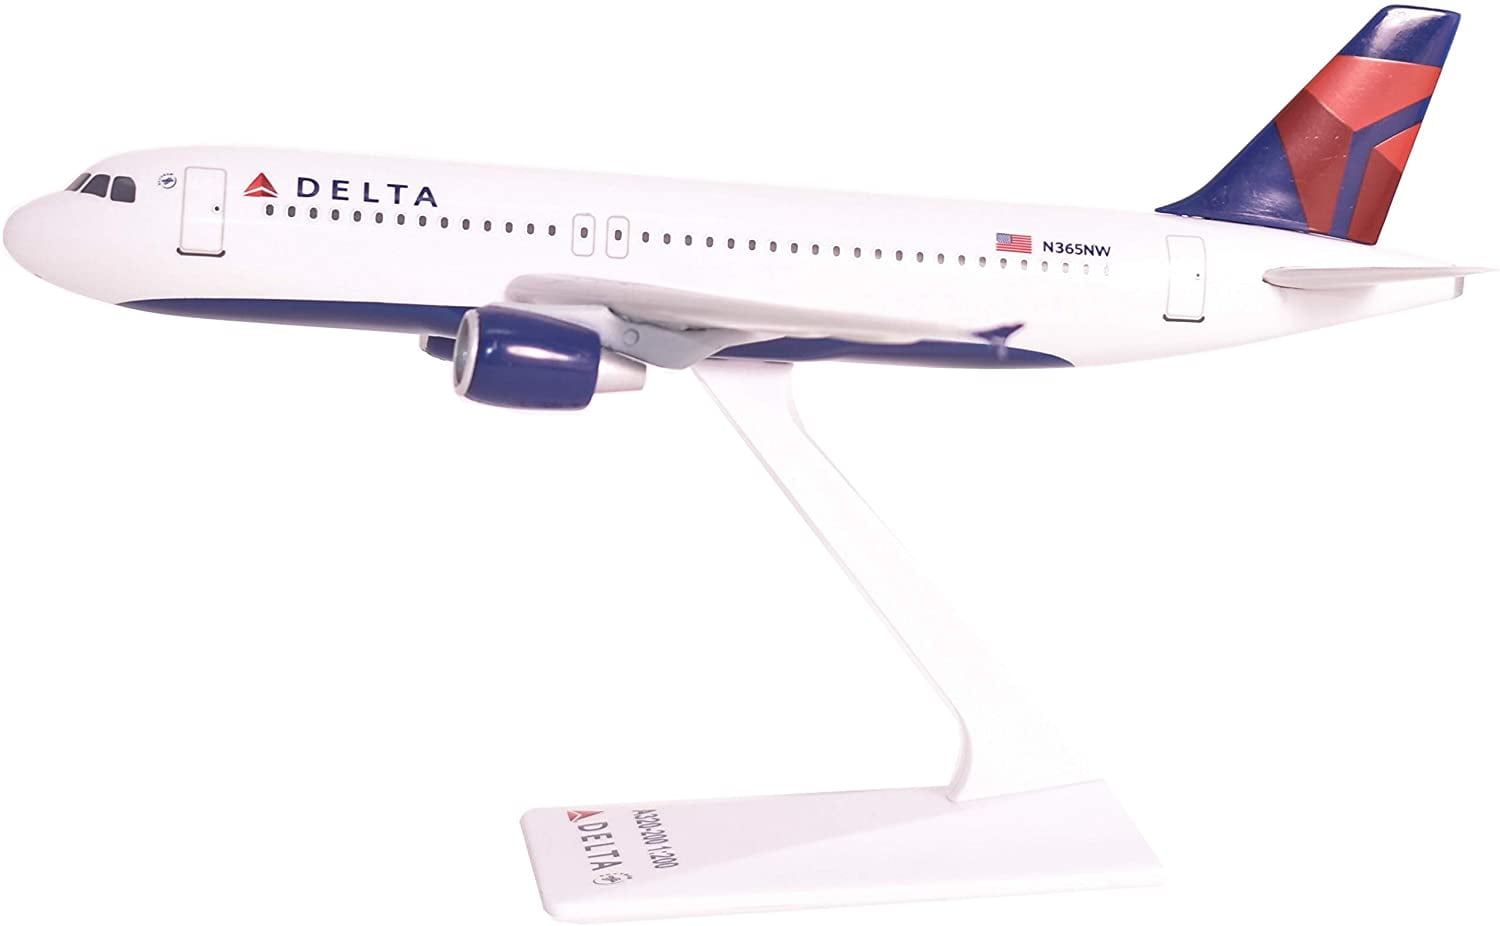 Delta A320-200 1:200Airplane Miniature Model Snap Fit 1:200 Part# AAB-32020H-063 07-Cur